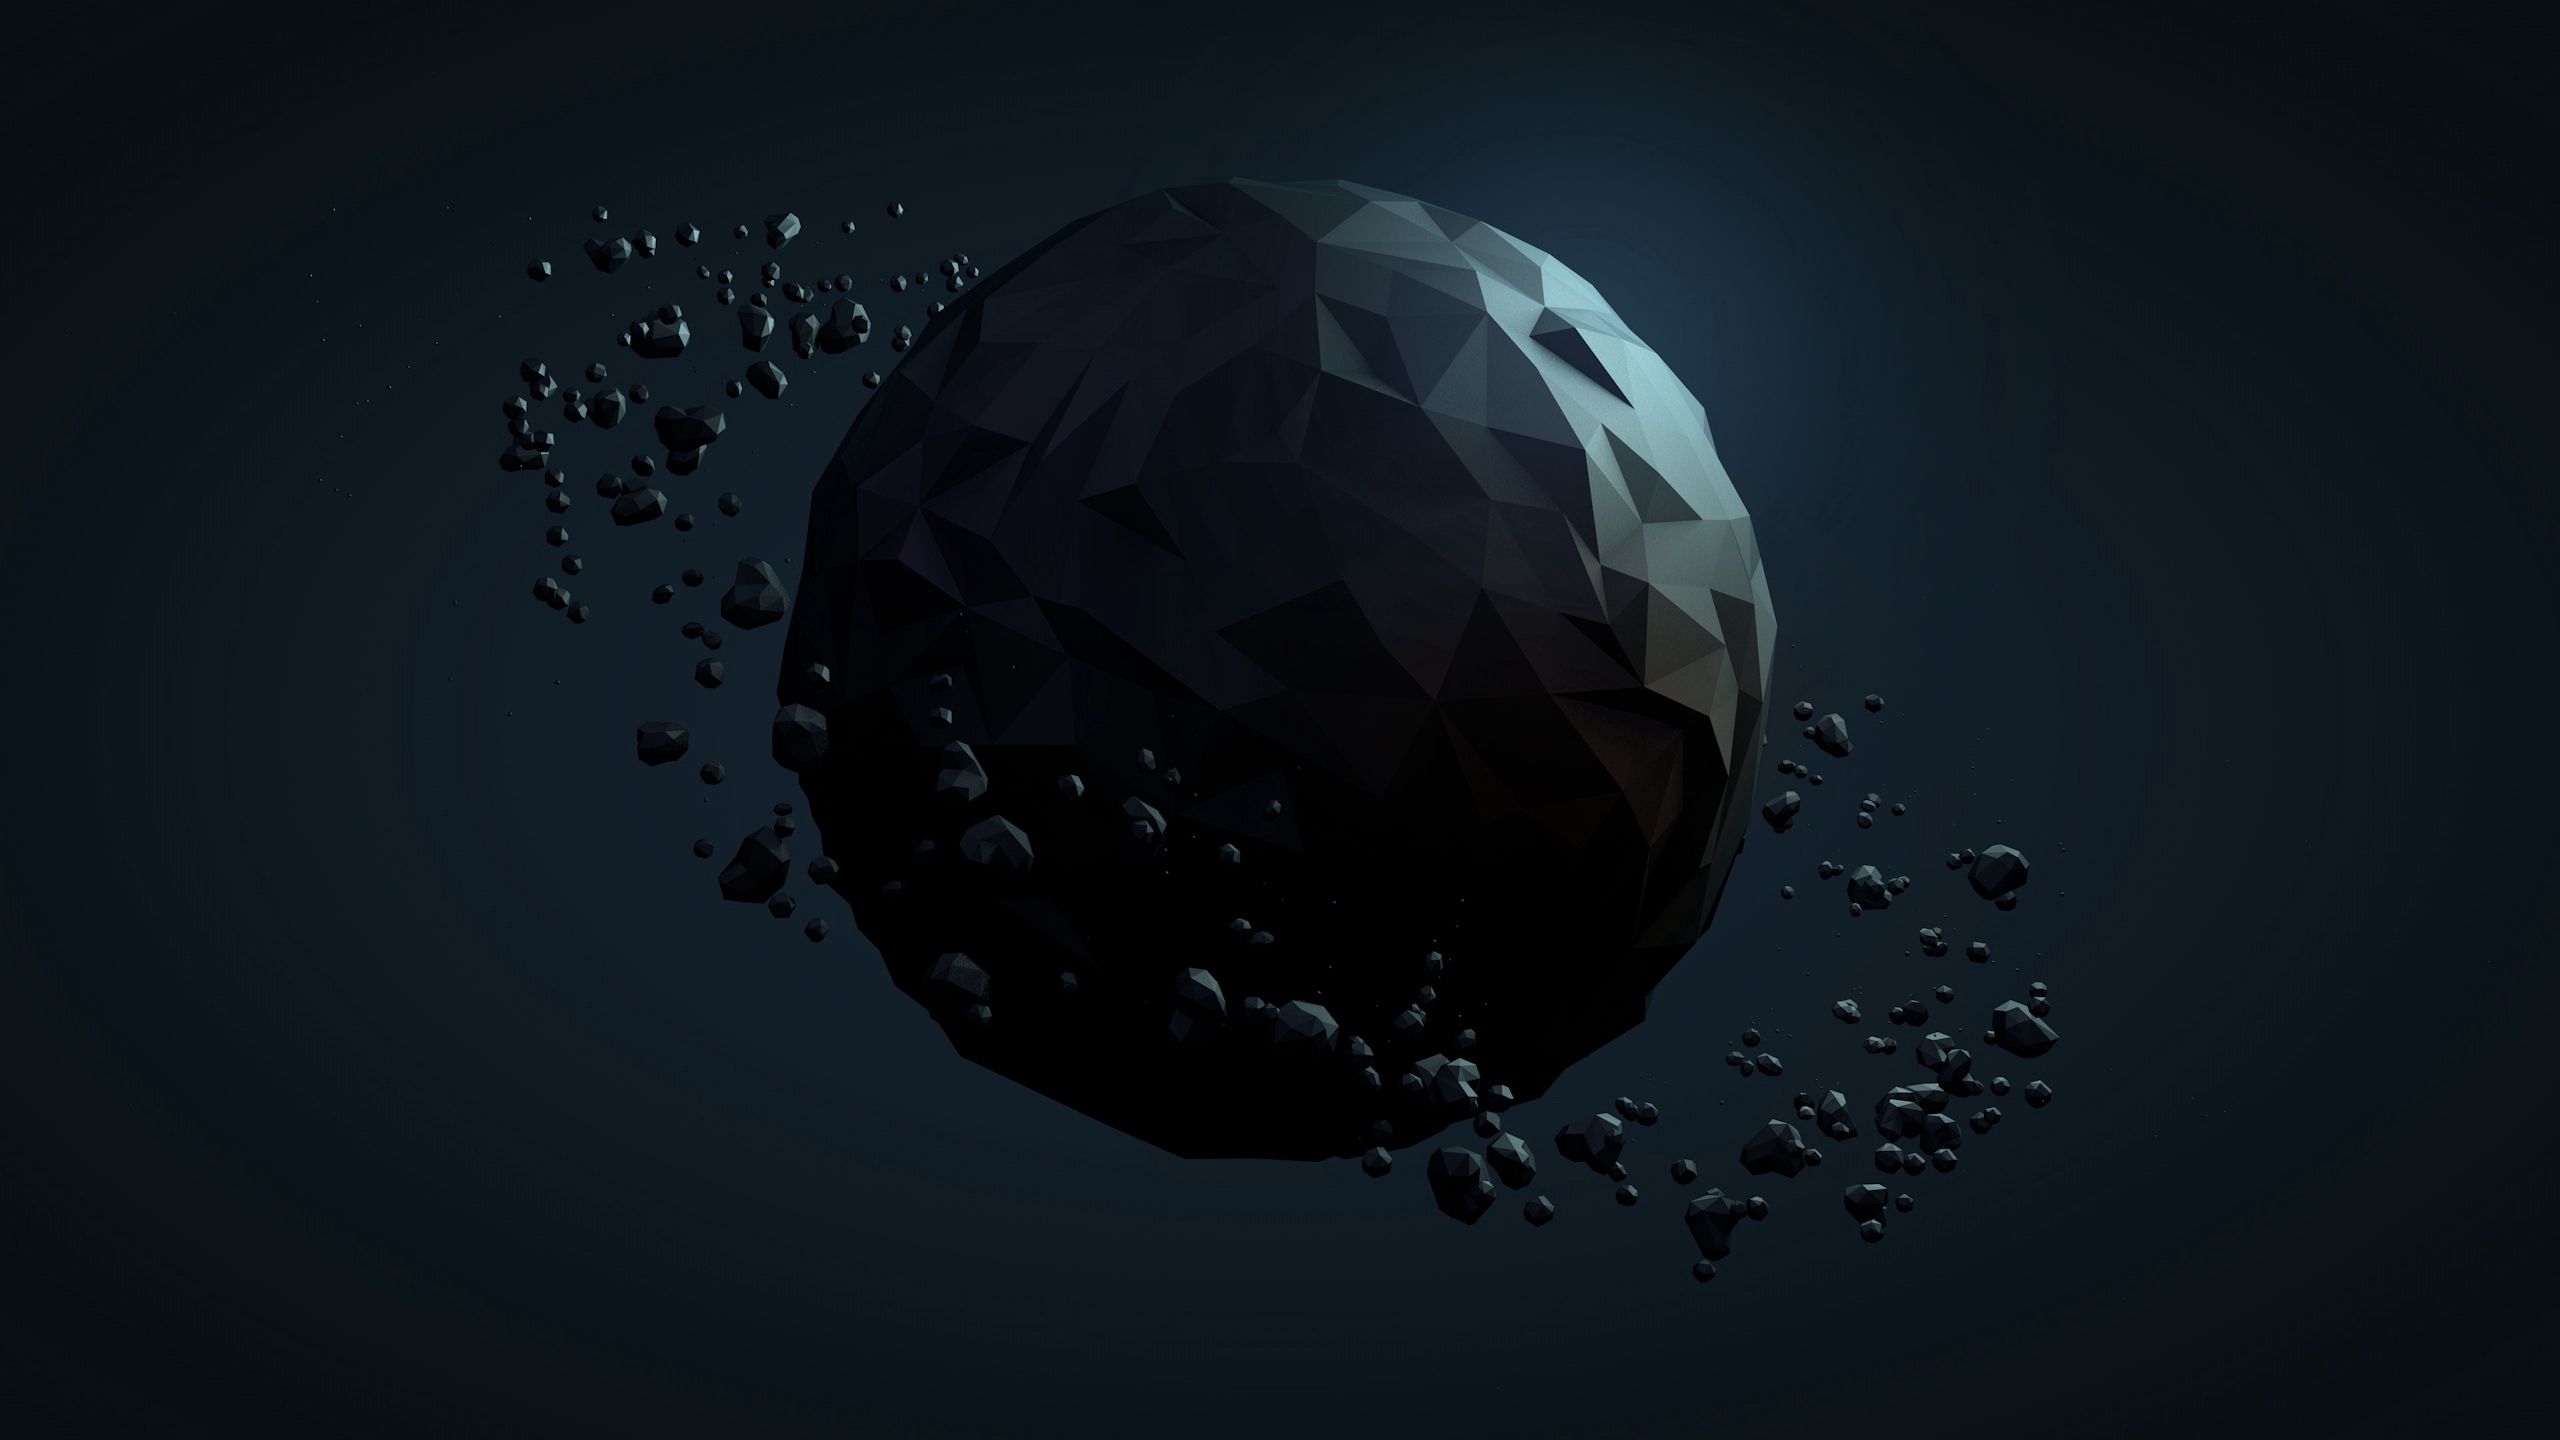 planet, dark, abstract, background, ball UHD